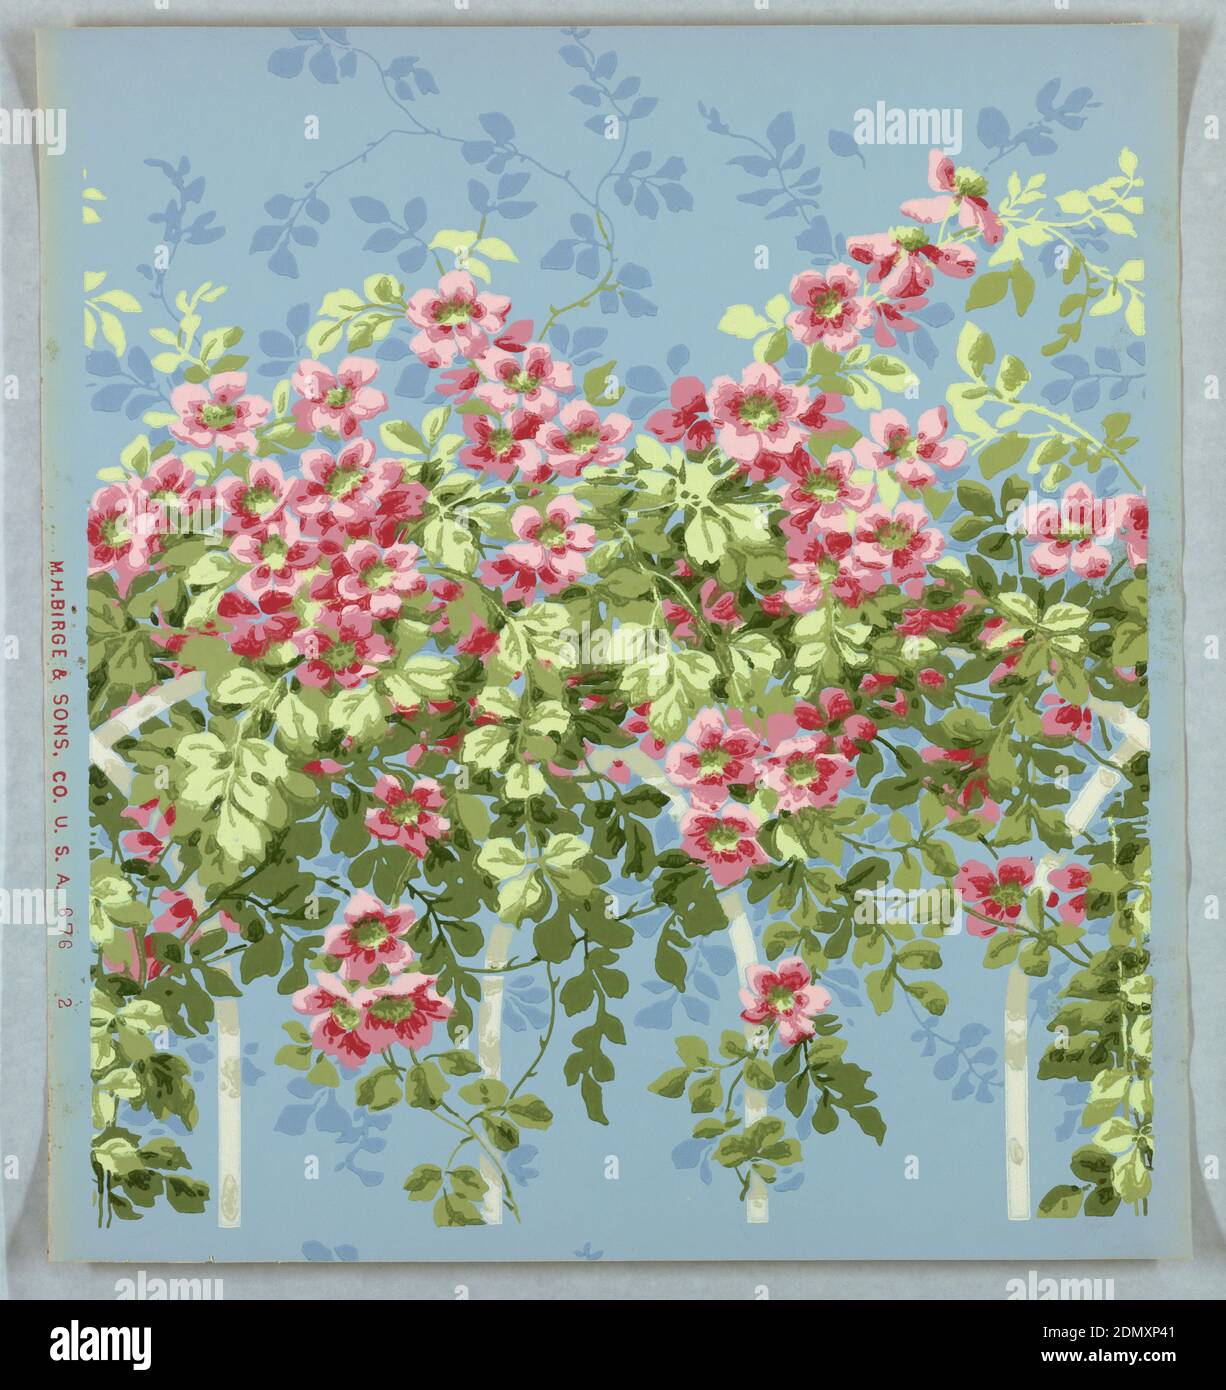 Sidewall, Machine-printed paper, Top portion of trellis panel: on light blue ground, pink wild roses and foliage on white trellis., Buffalo, New York, USA, 1890–1920, Wallcoverings, Sidewall Stock Photo